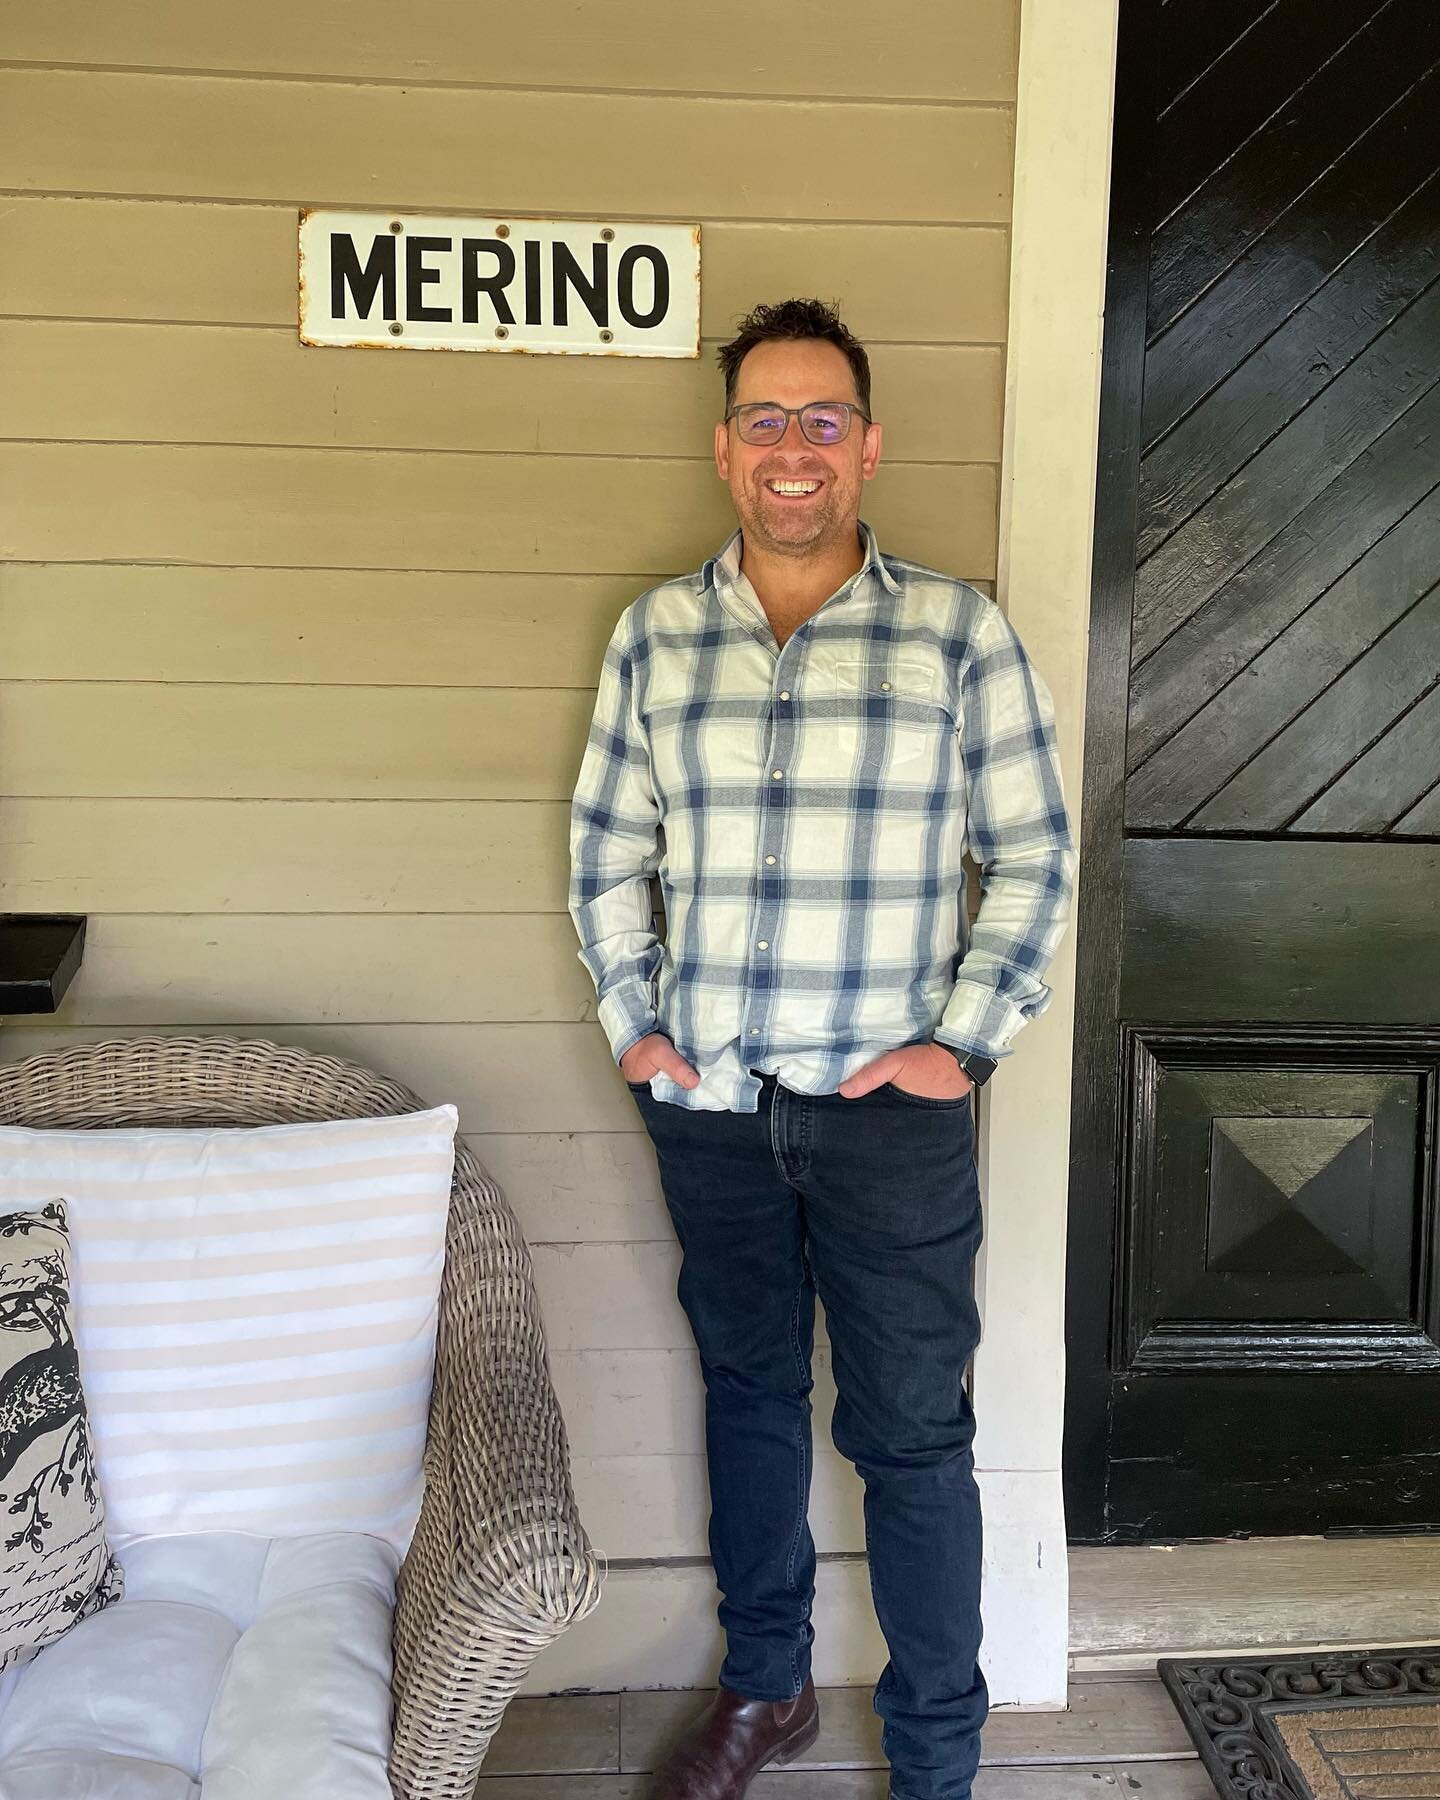 You just know you are on a good thing, when someone names their home Merino! @hedgefarm #wool #agriculture #sustainable #family